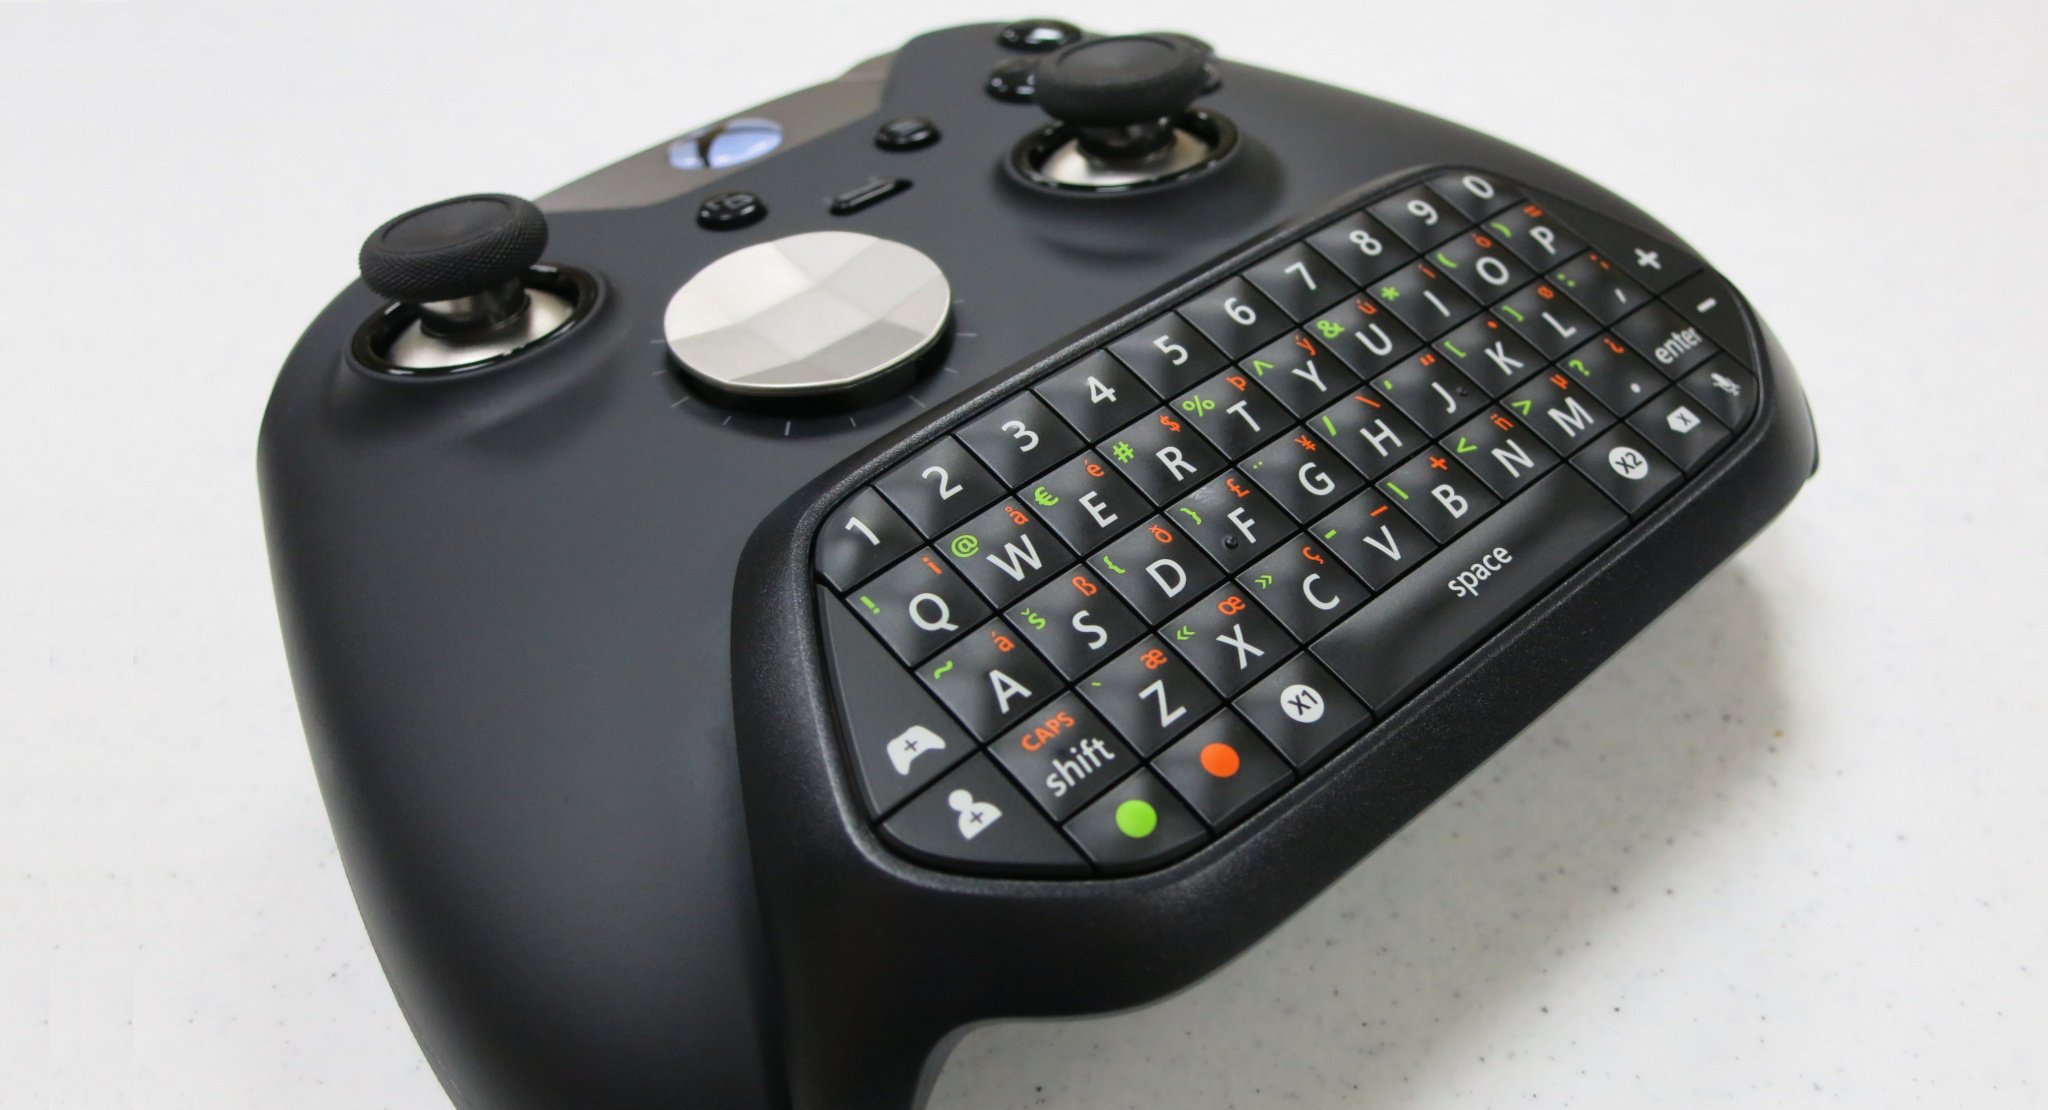 Microsoft Xbox One Chatpad Review: The Best Chatpad You Can Get